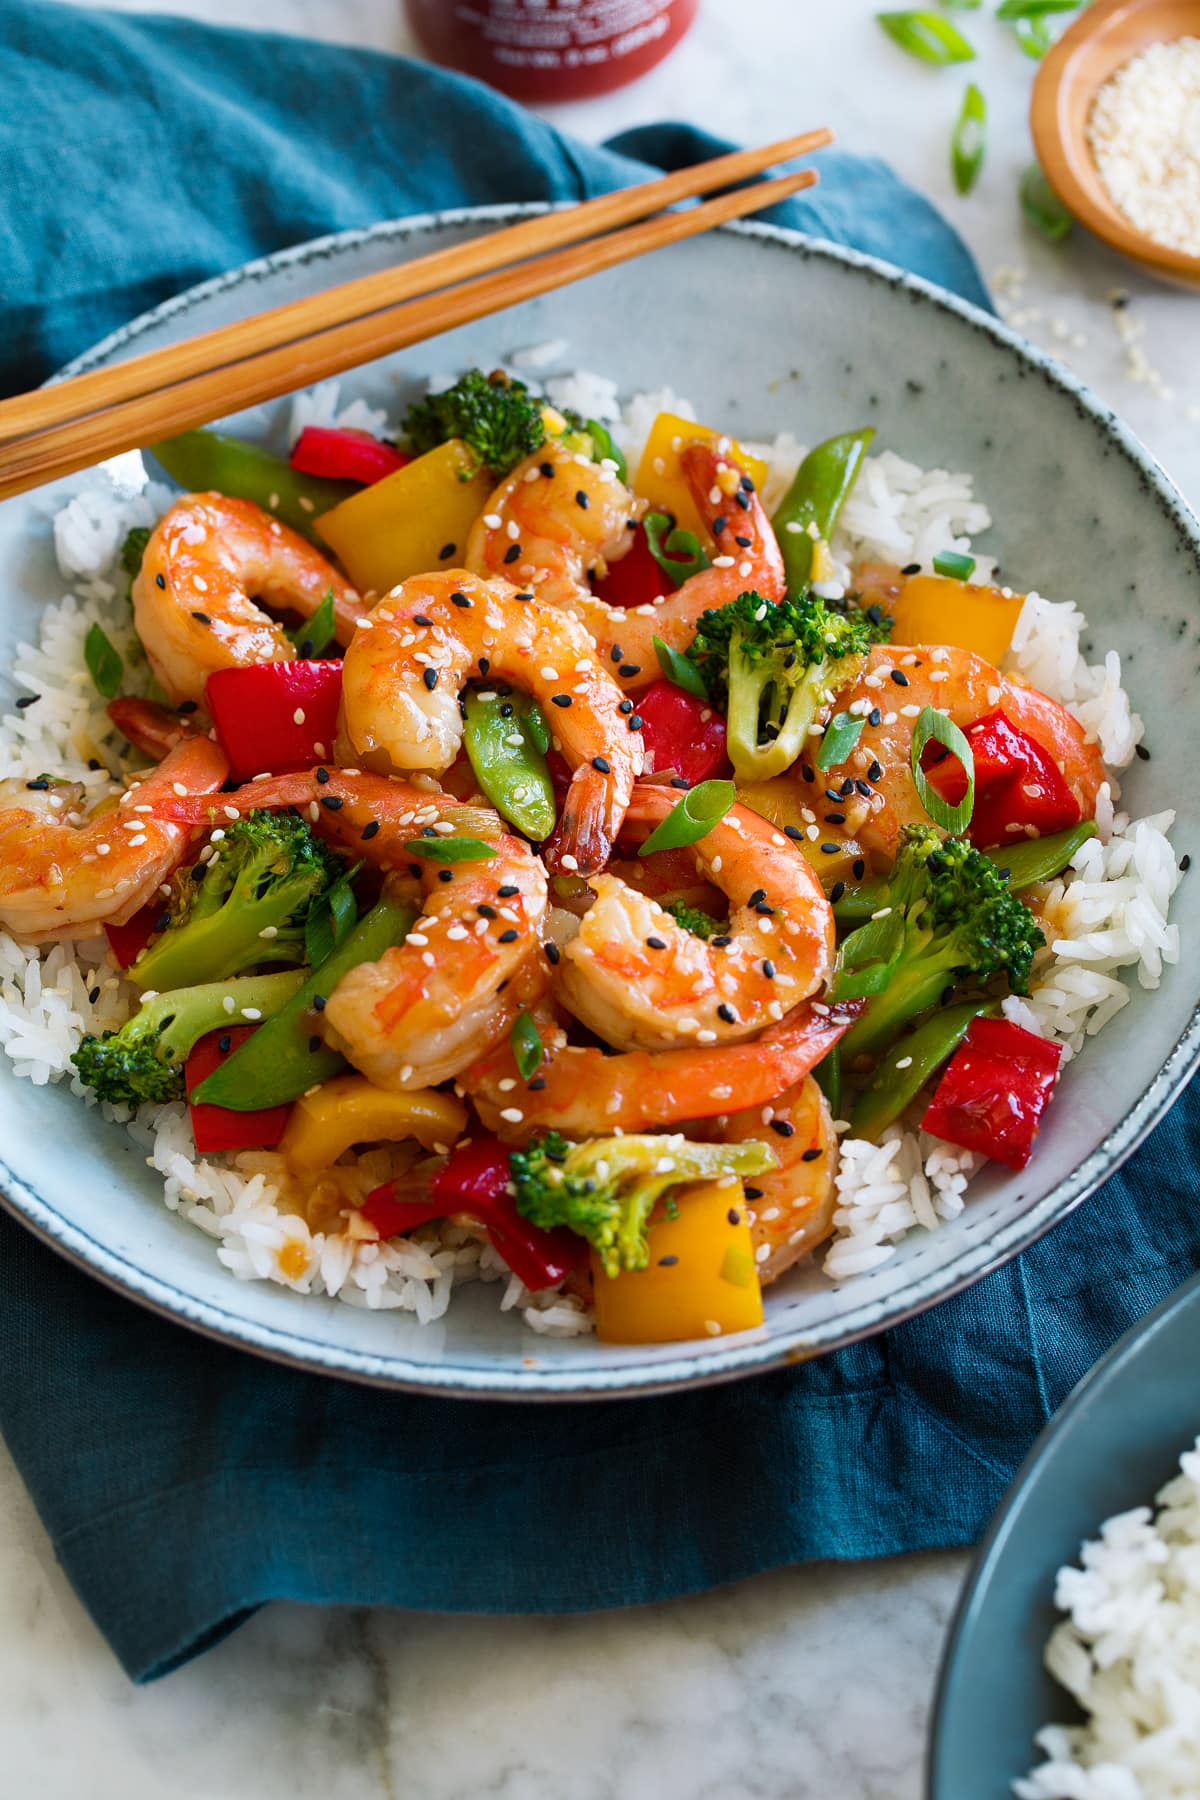 Shrimp stir fry with vegetables and rice.